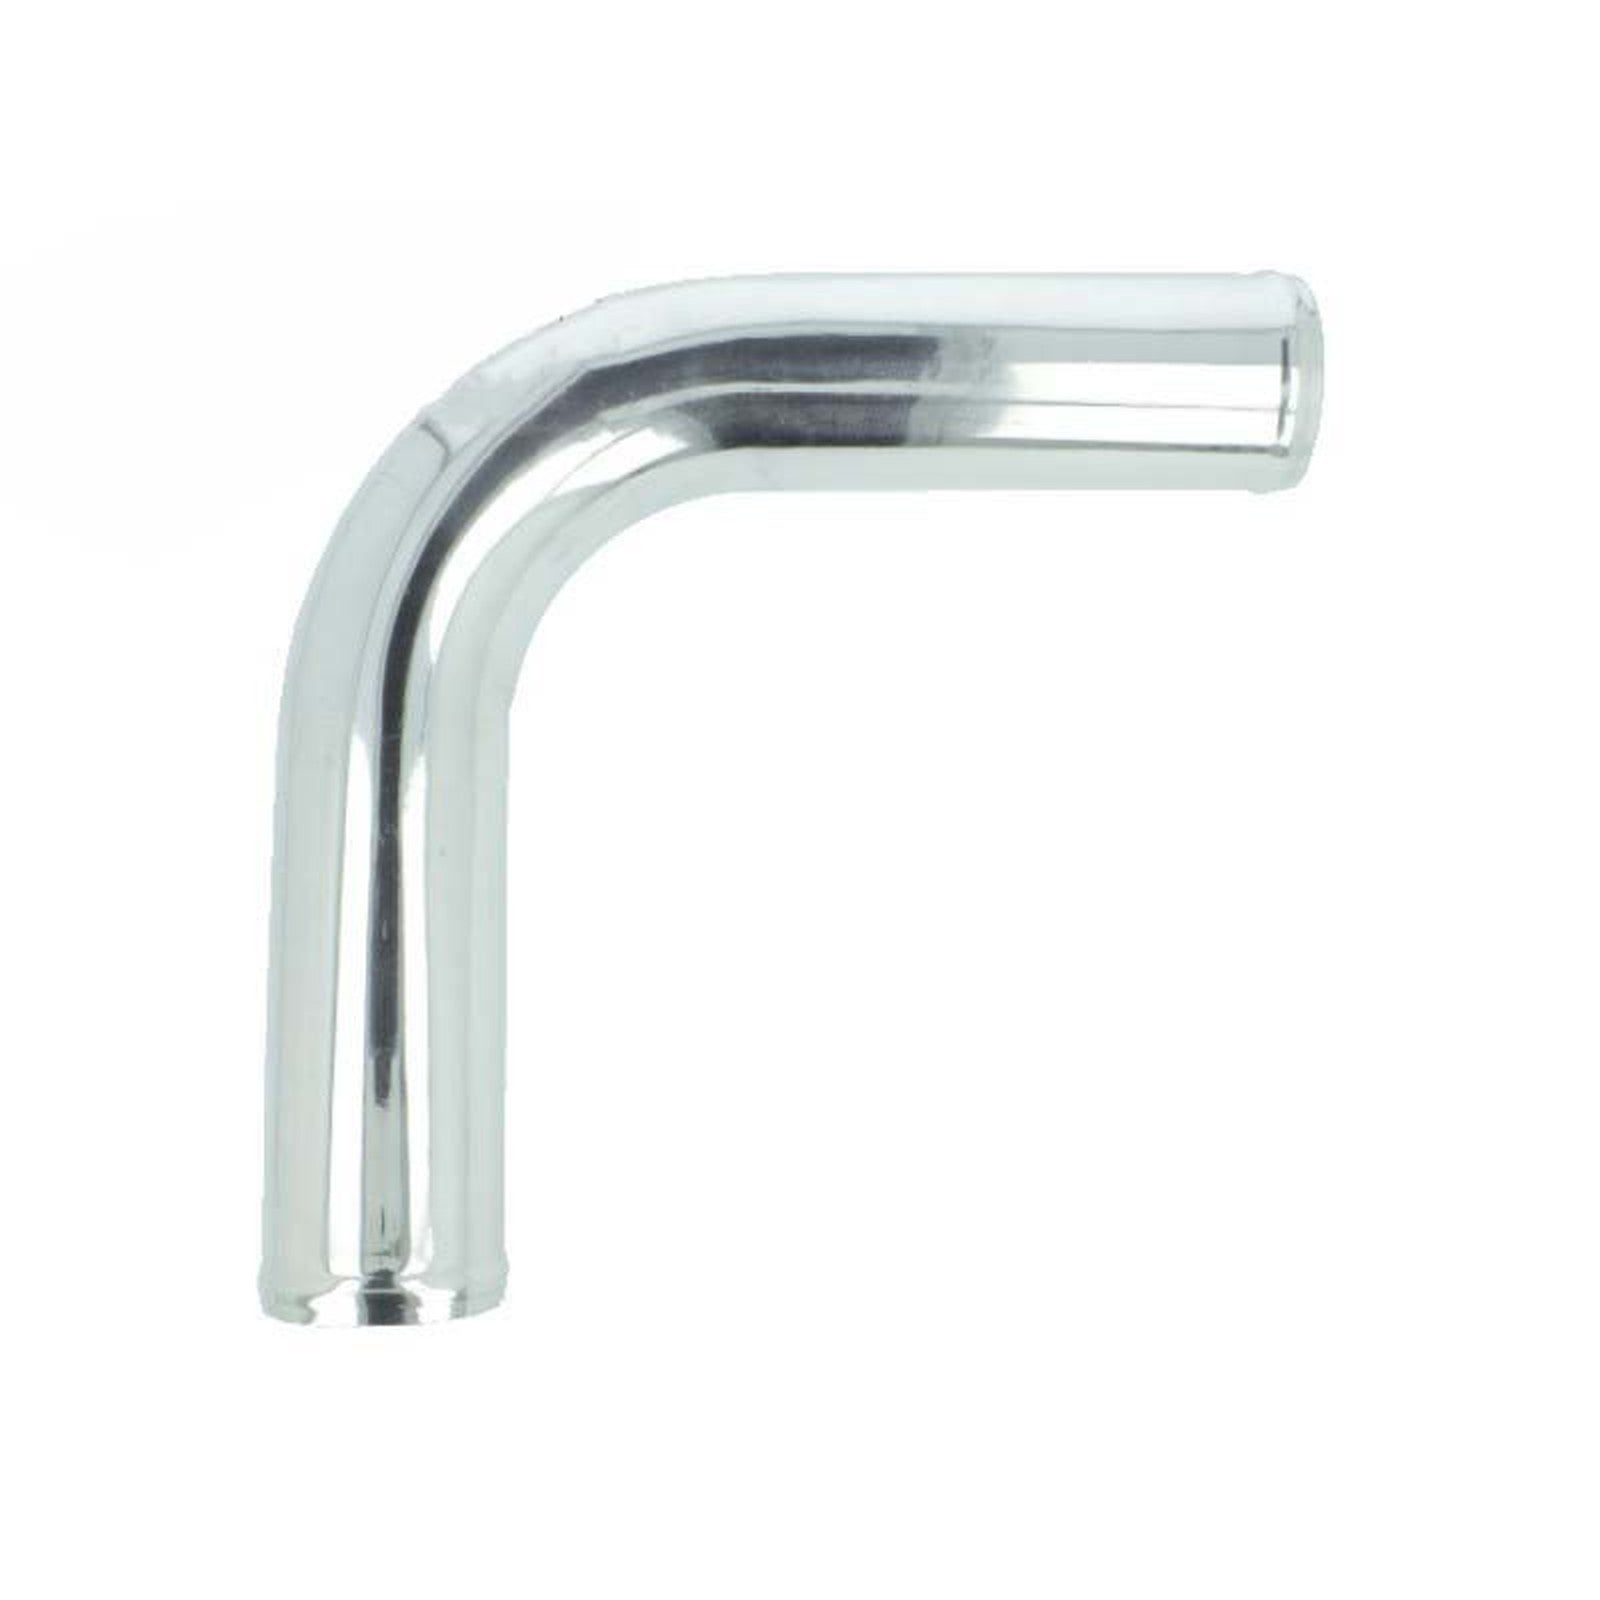 BOOST Products Aluminum Elbow 90 Degrees with 80mm (3-1/8") OD, Mandrel Bent, Polished